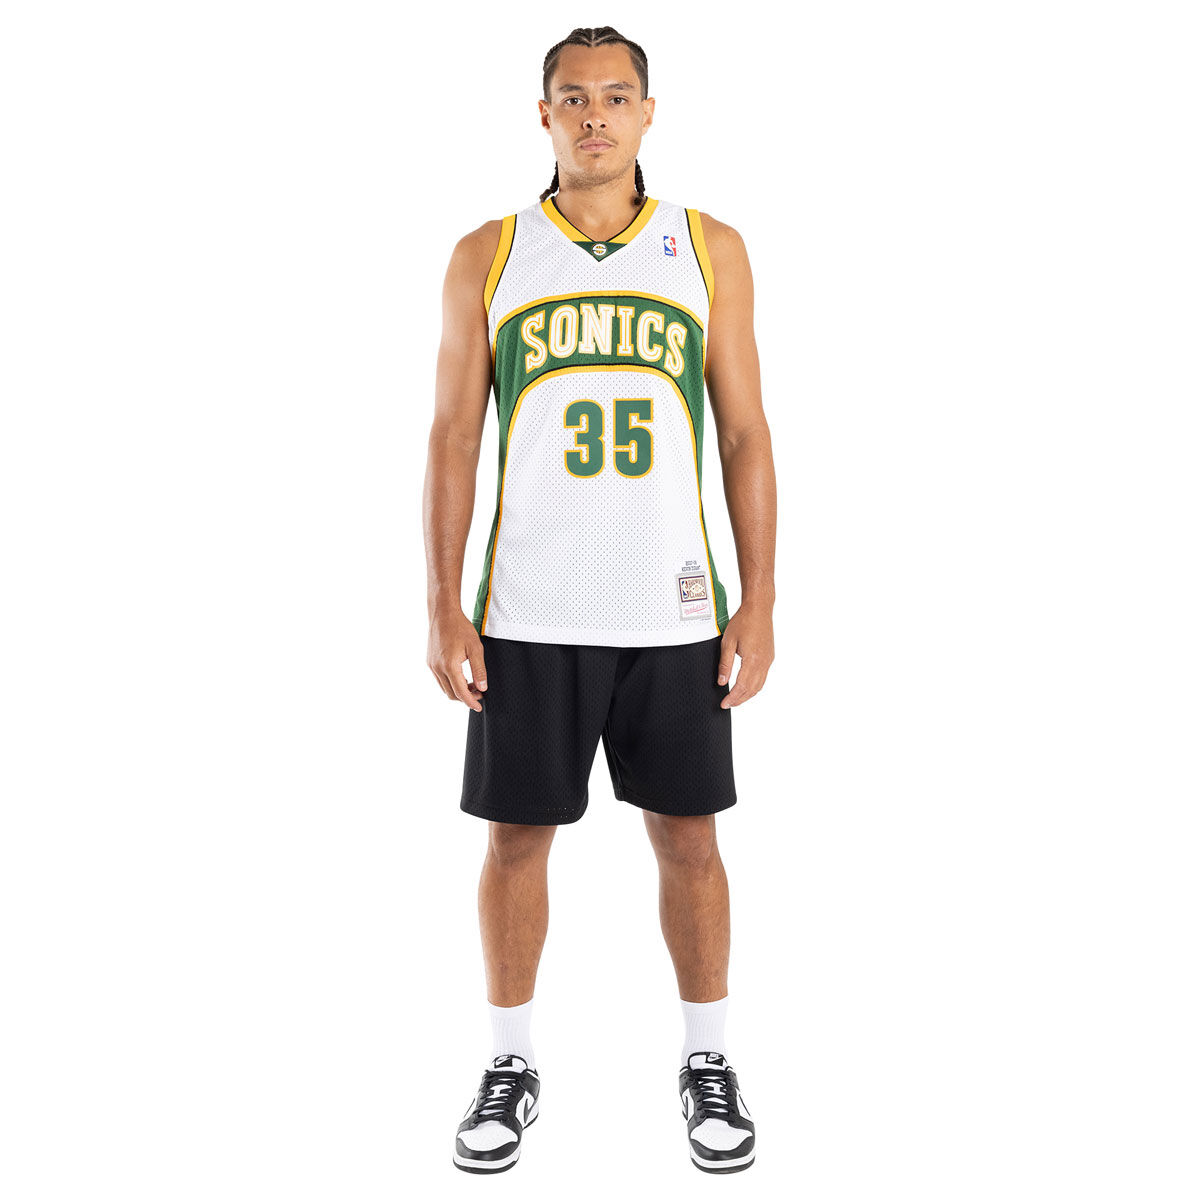 Mitchell & Ness Rising Stars Sophomore Swingman Kevin Durant 2009-10 Jersey